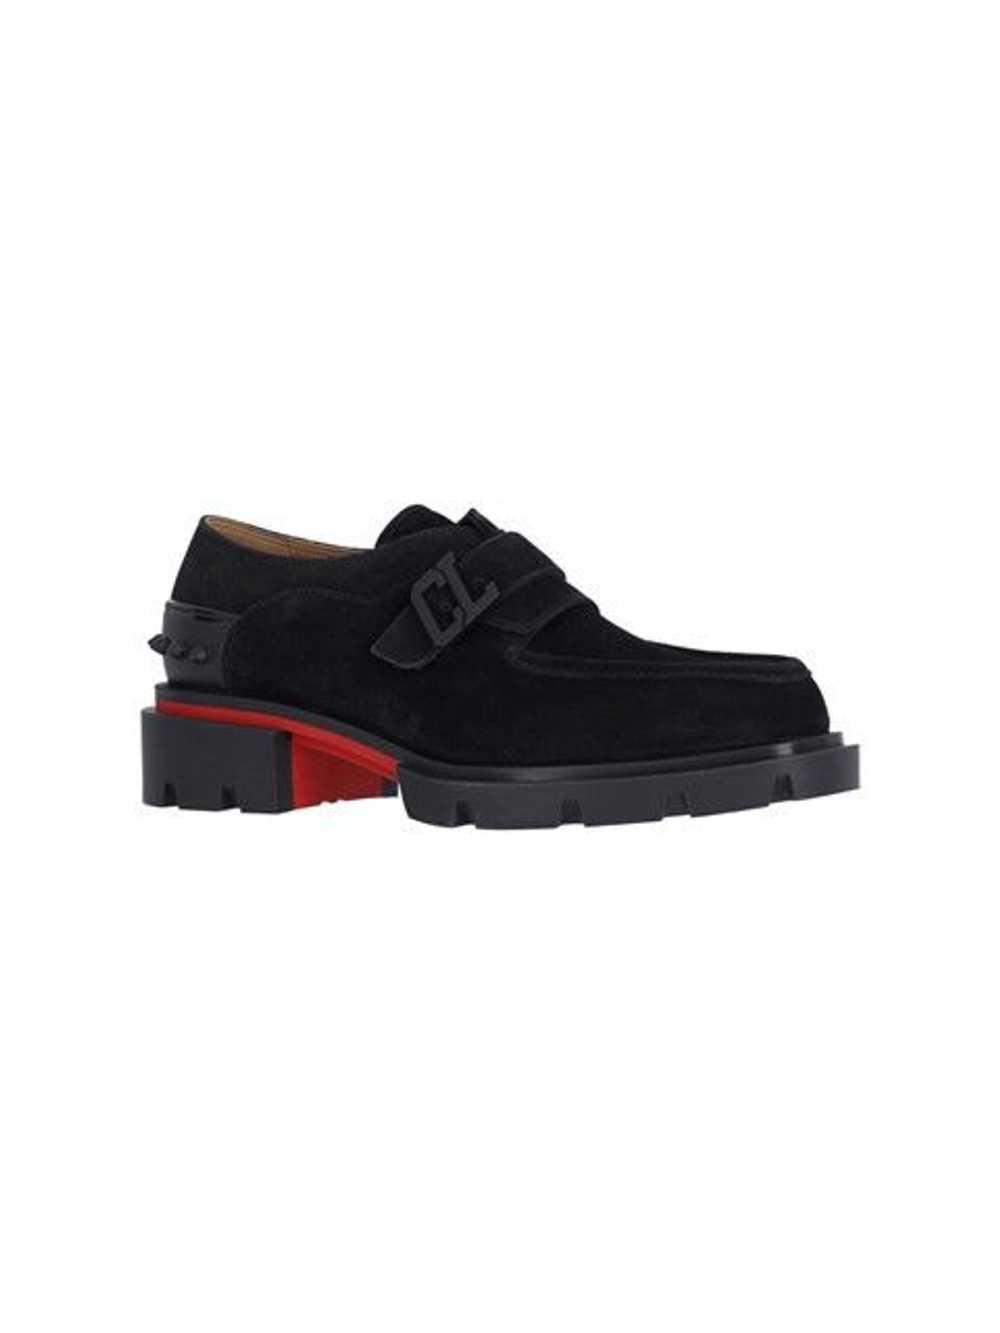 Christian Louboutin SUEDE LOAFERS - image 2